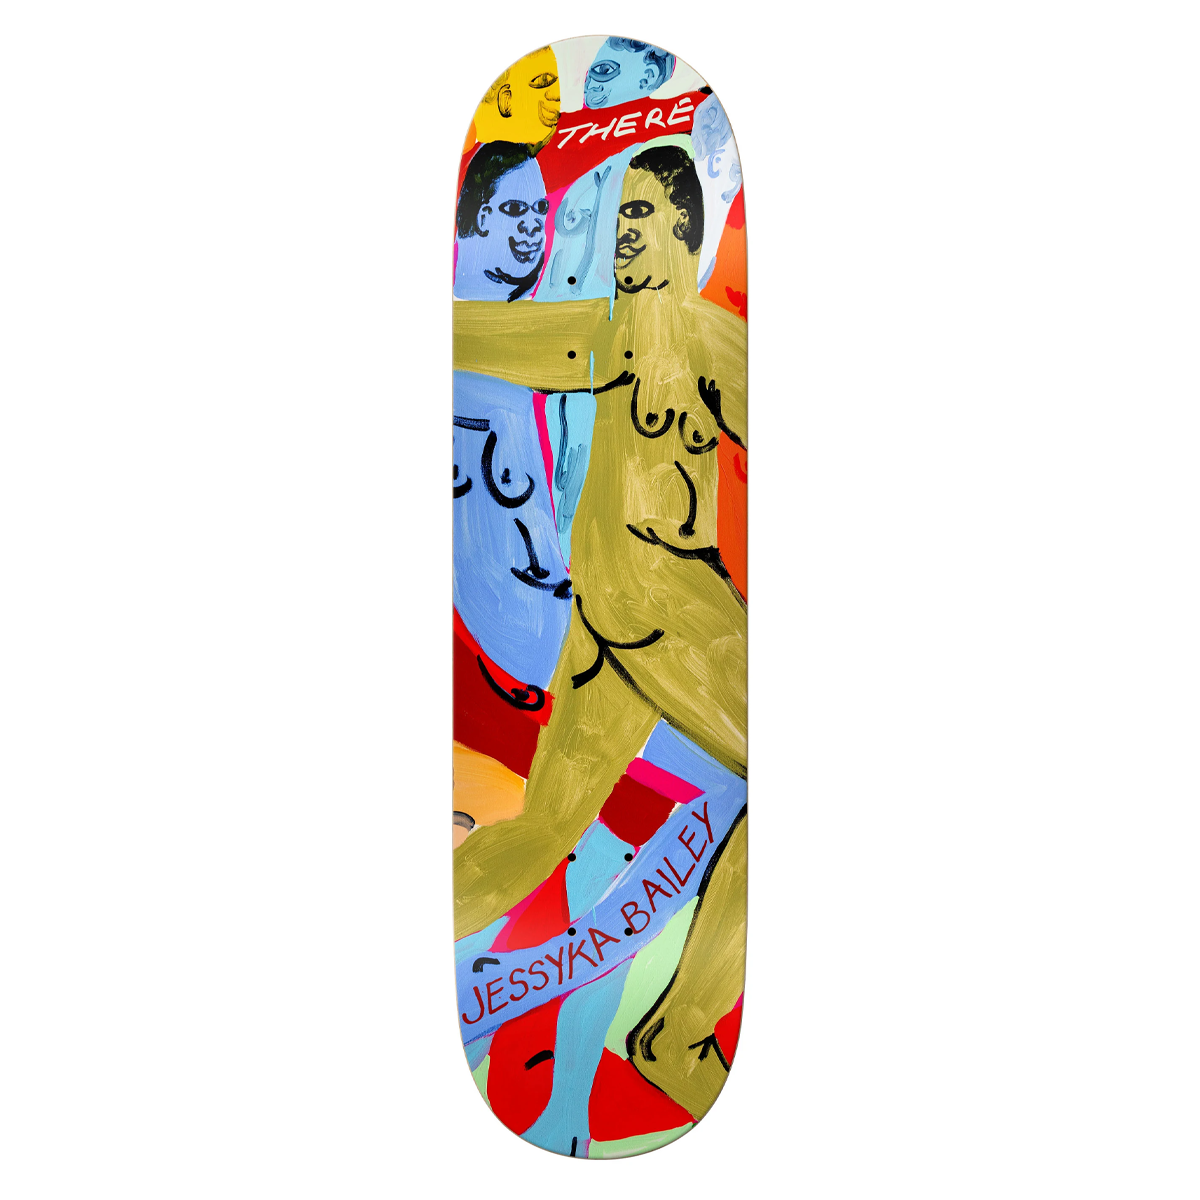 There Jessyka In Ur Face Skate Deck - 8.25